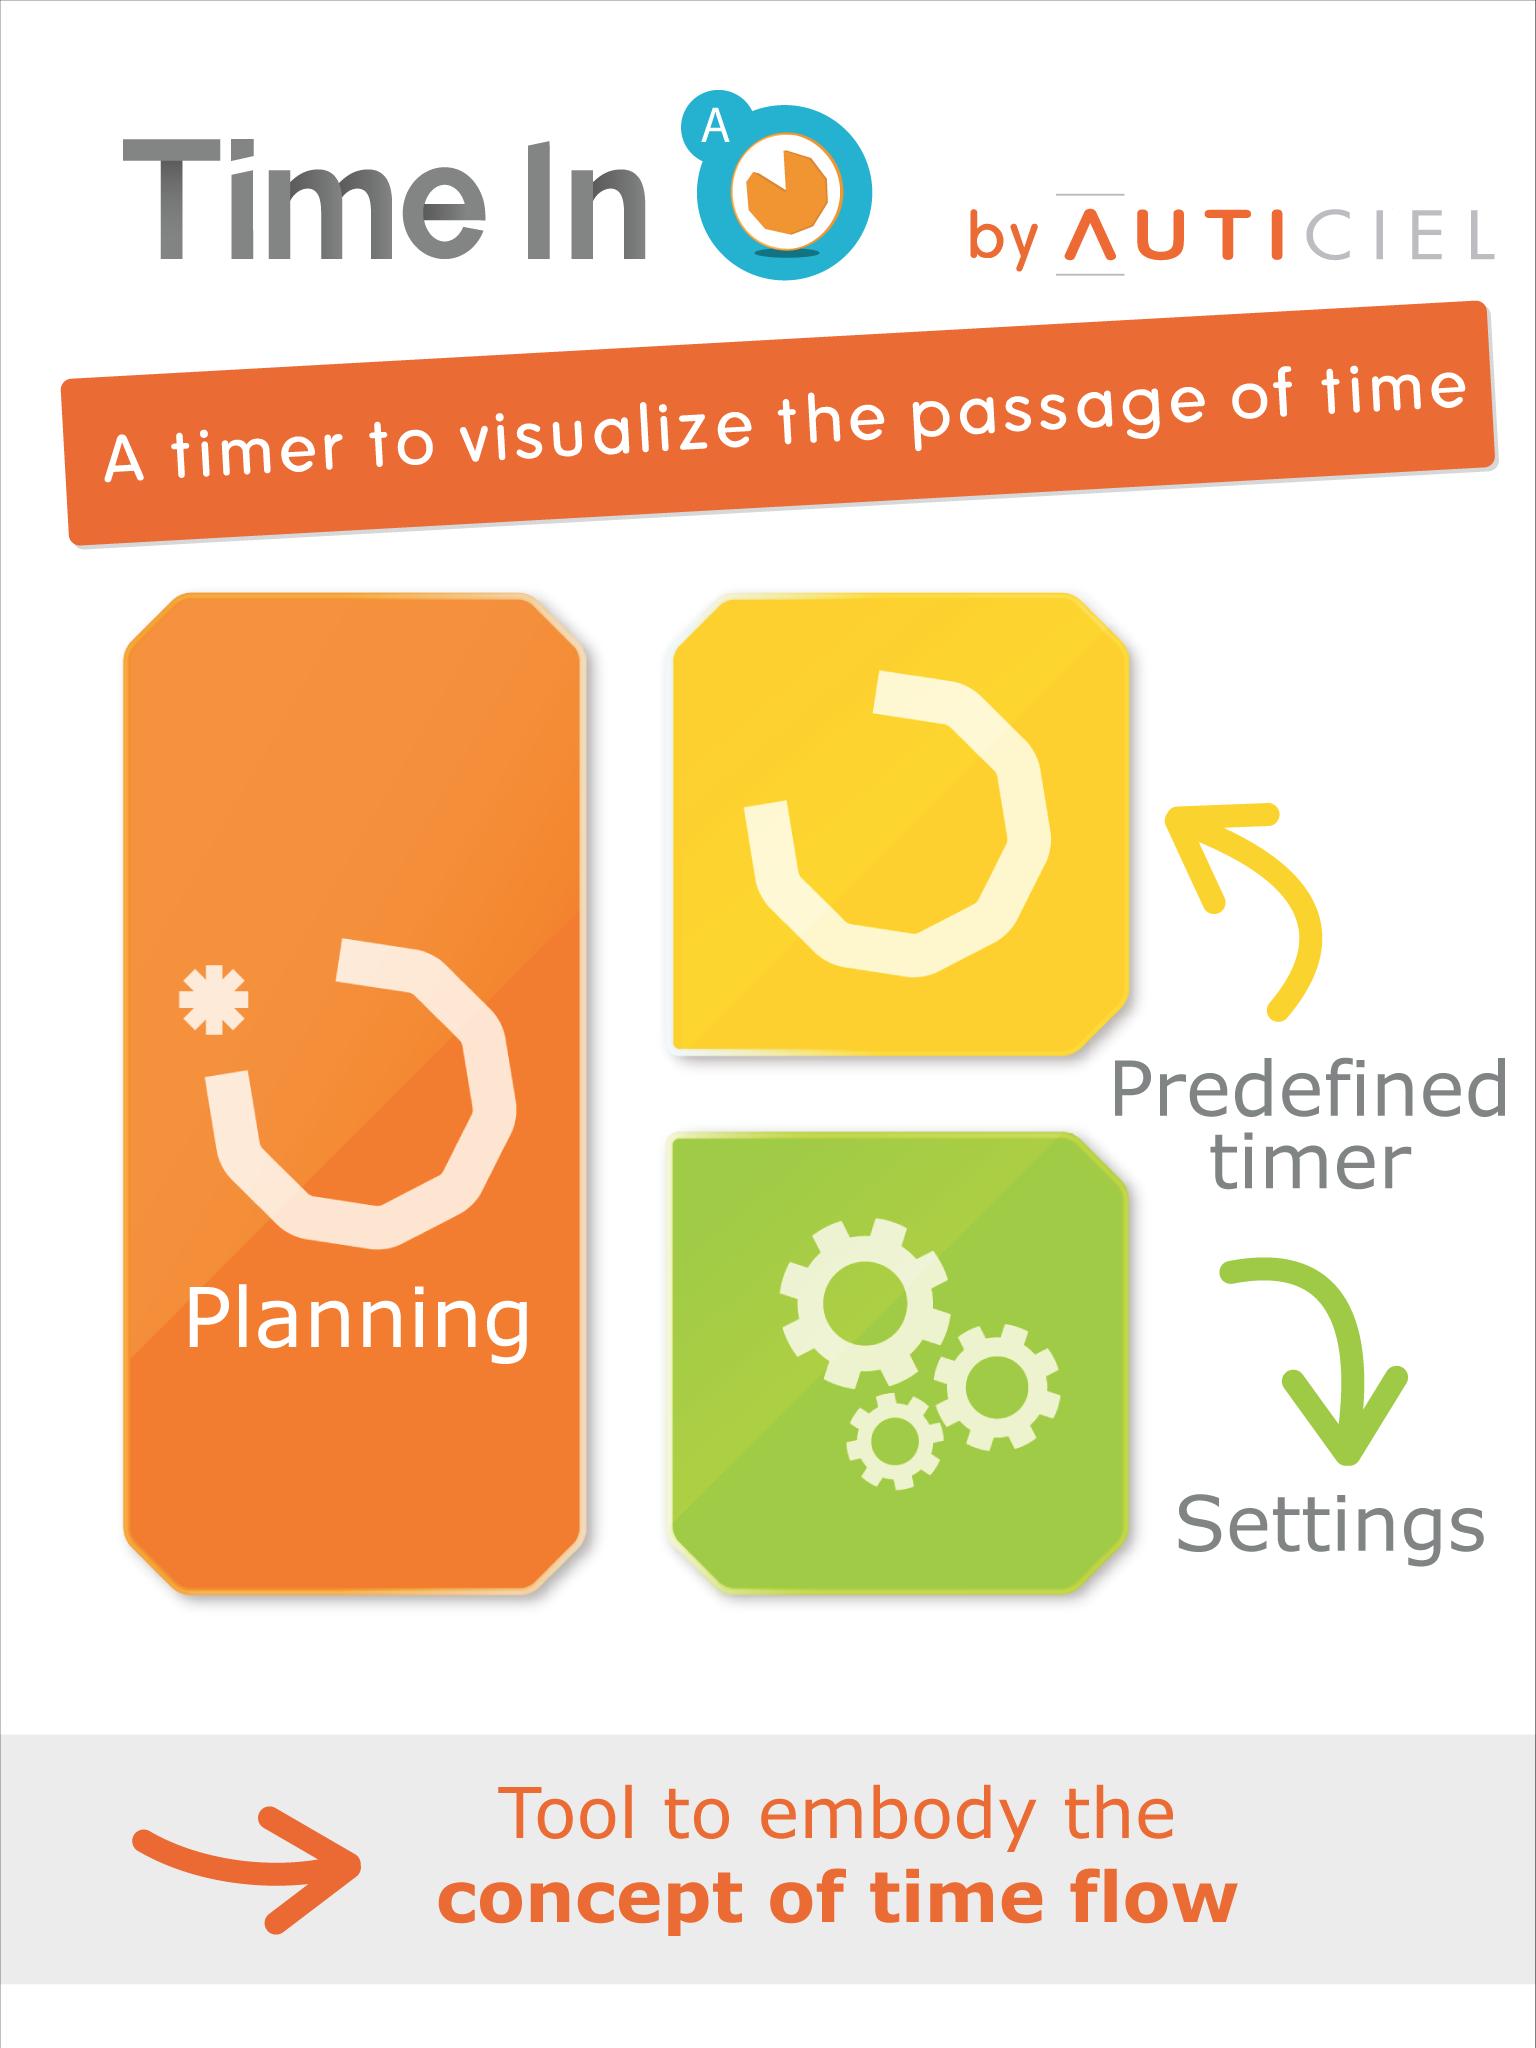 Time in - Smart timers — AMIKEO APPS 2.5.8 Screenshot 11